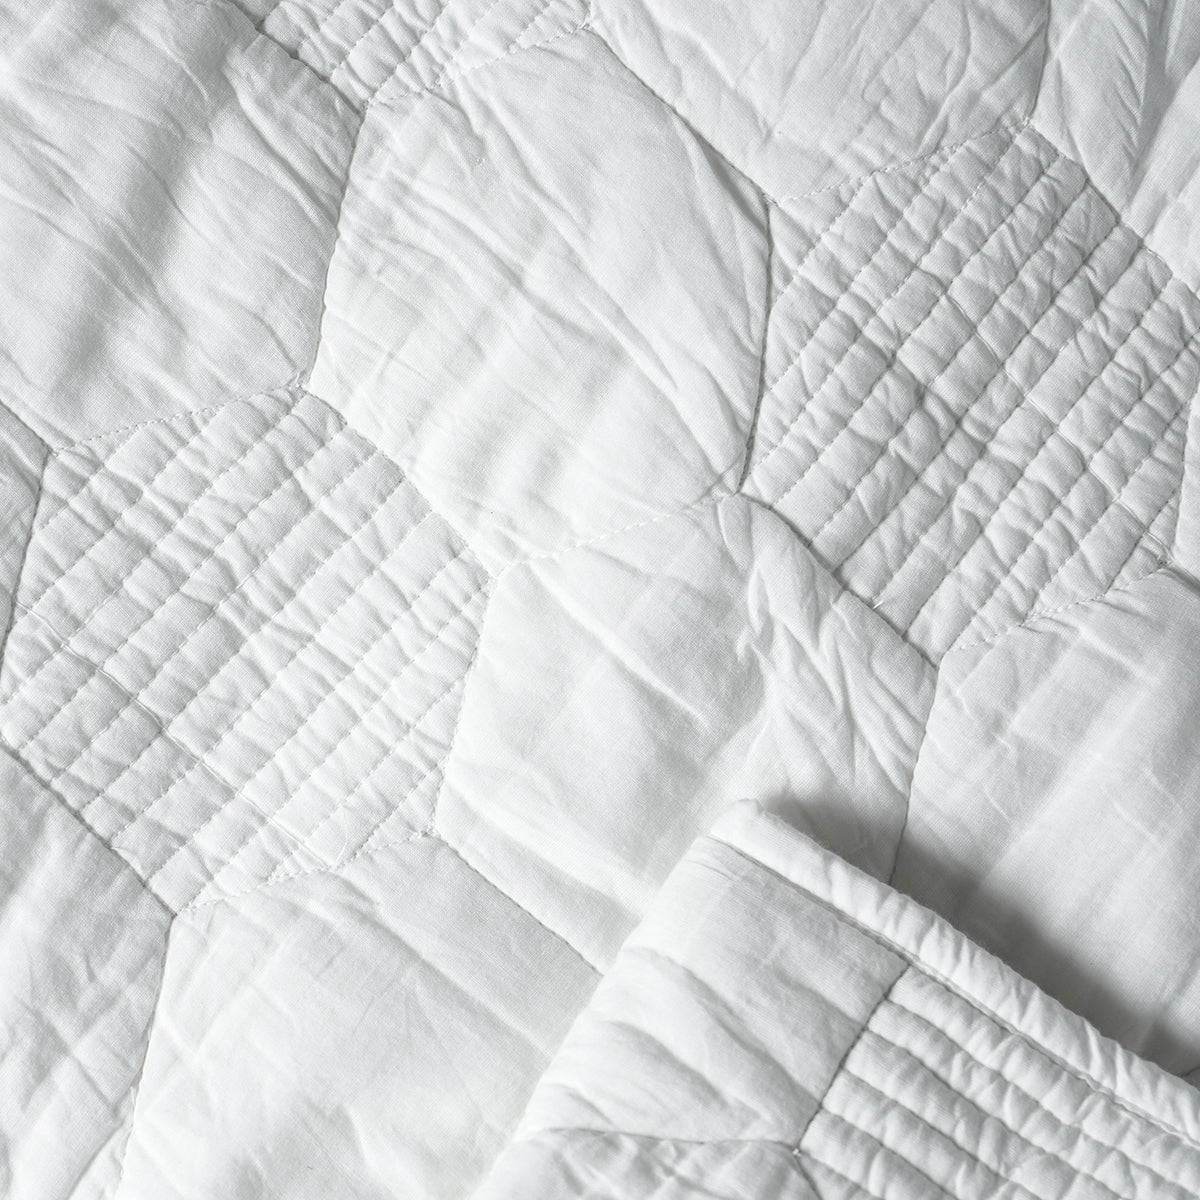 SHWET - White cotton quilted bedspread with hexagon pattern, Sizes available